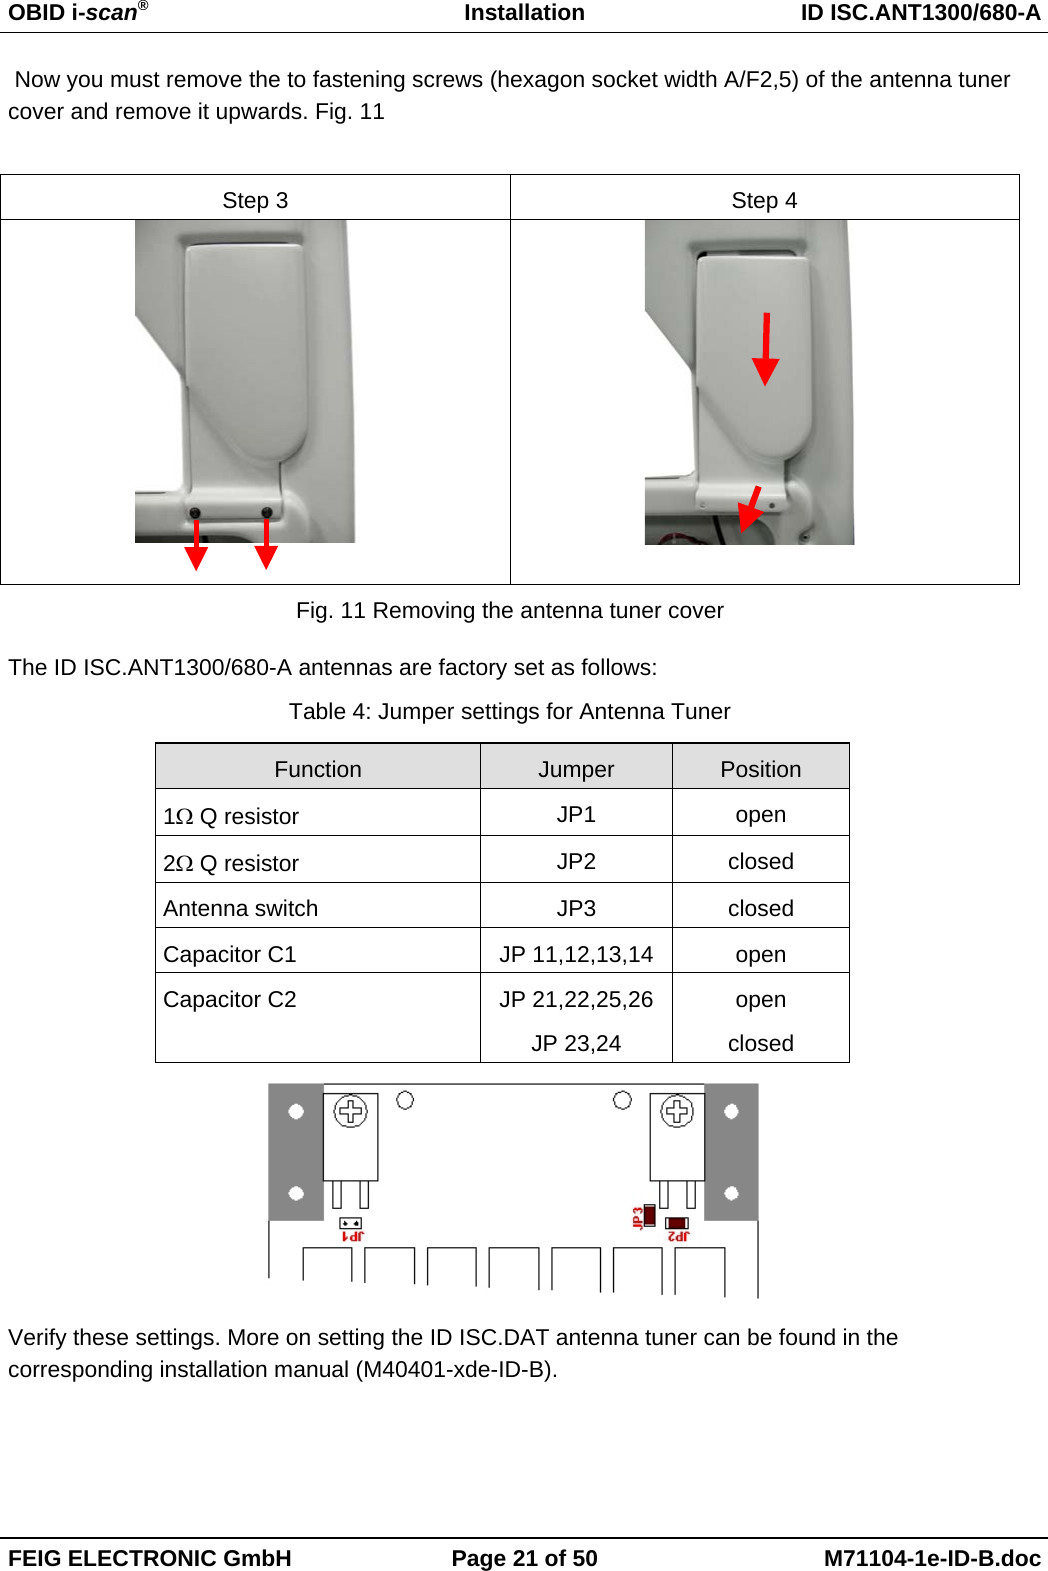 OBID i-scan®Installation ID ISC.ANT1300/680-AFEIG ELECTRONIC GmbH Page 21 of 50 M71104-1e-ID-B.doc Now you must remove the to fastening screws (hexagon socket width A/F2,5) of the antenna tunercover and remove it upwards. Fig. 11Step 3 Step 4                    Fig. 11 Removing the antenna tuner coverThe ID ISC.ANT1300/680-A antennas are factory set as follows:Table 4: Jumper settings for Antenna TunerFunction Jumper Position1Ω Q resistor JP1 open2Ω Q resistor JP2 closedAntenna switch JP3 closedCapacitor C1 JP 11,12,13,14 openCapacitor C2 JP 21,22,25,26JP 23,24openclosedVerify these settings. More on setting the ID ISC.DAT antenna tuner can be found in thecorresponding installation manual (M40401-xde-ID-B).